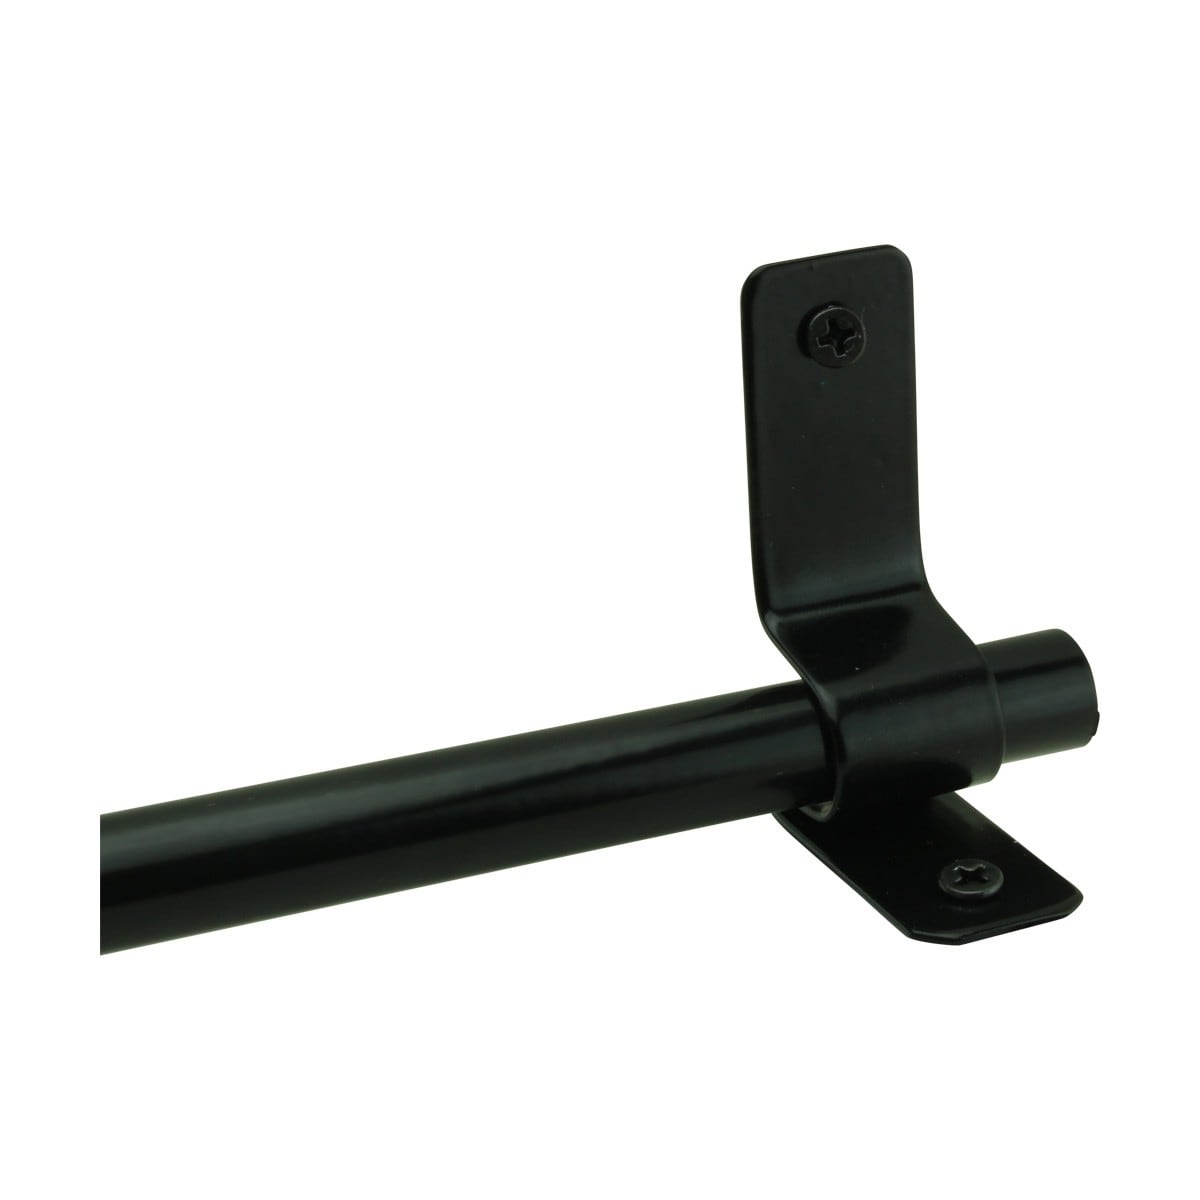 https://ak1.ostkcdn.com/images/products/is/images/direct/8dd7e12a82fec3b14970a8aeeafded134424573a/Black-Carpet-Rod-for-Stair-Runners-Rod-Tube-Holder-With-Brackets.jpg